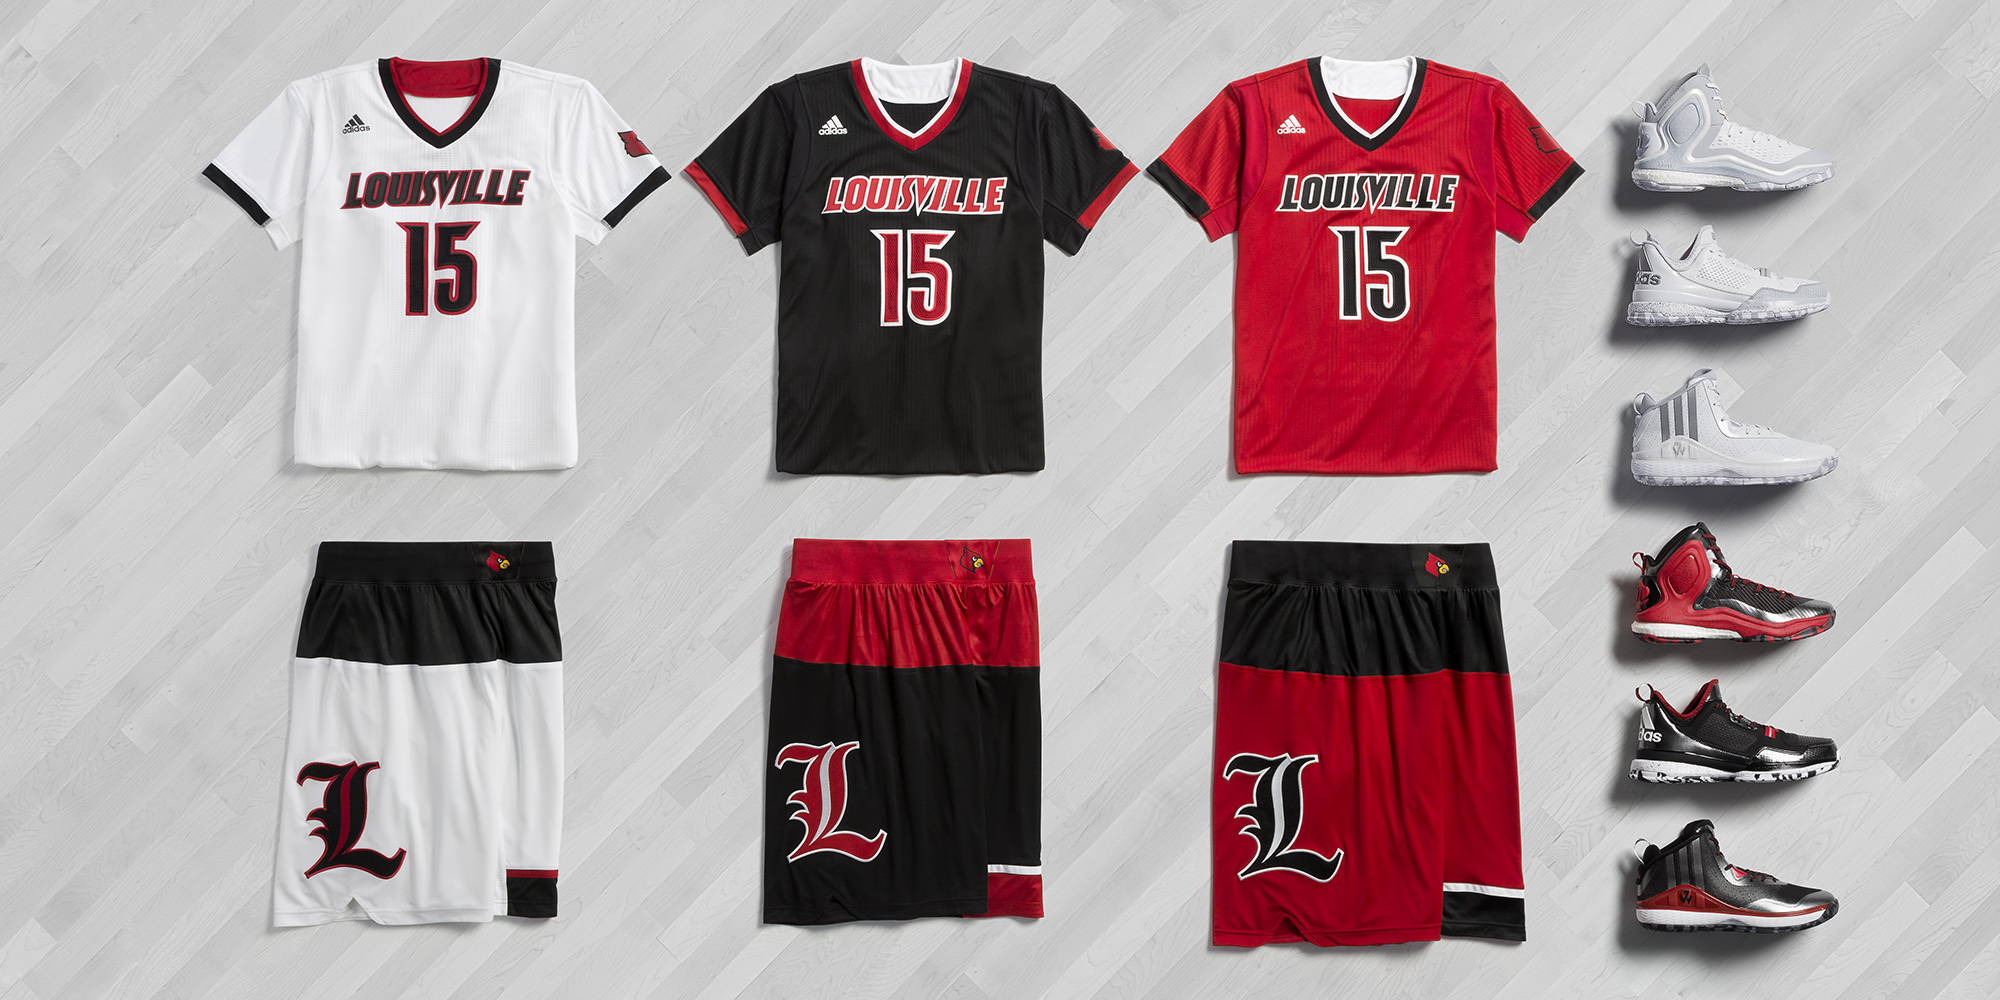 adidas Made in March collection for Louisville 